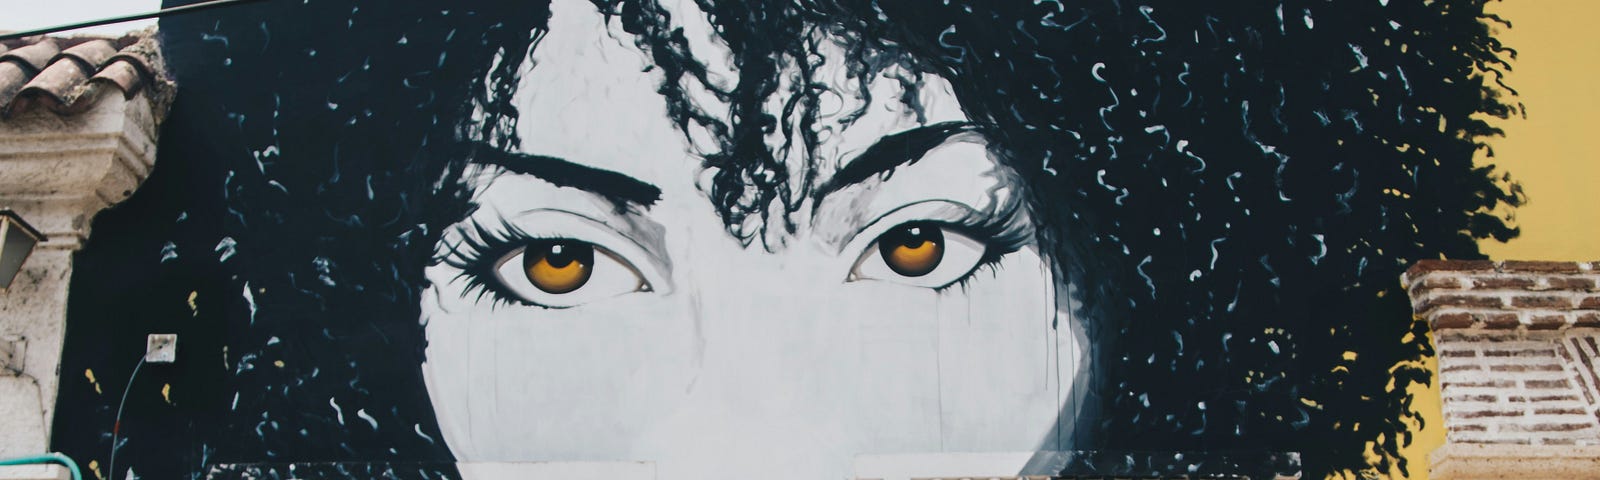 murial painting of woman on the side of a building. She has black curly hair and brown eyes and red lipstick.